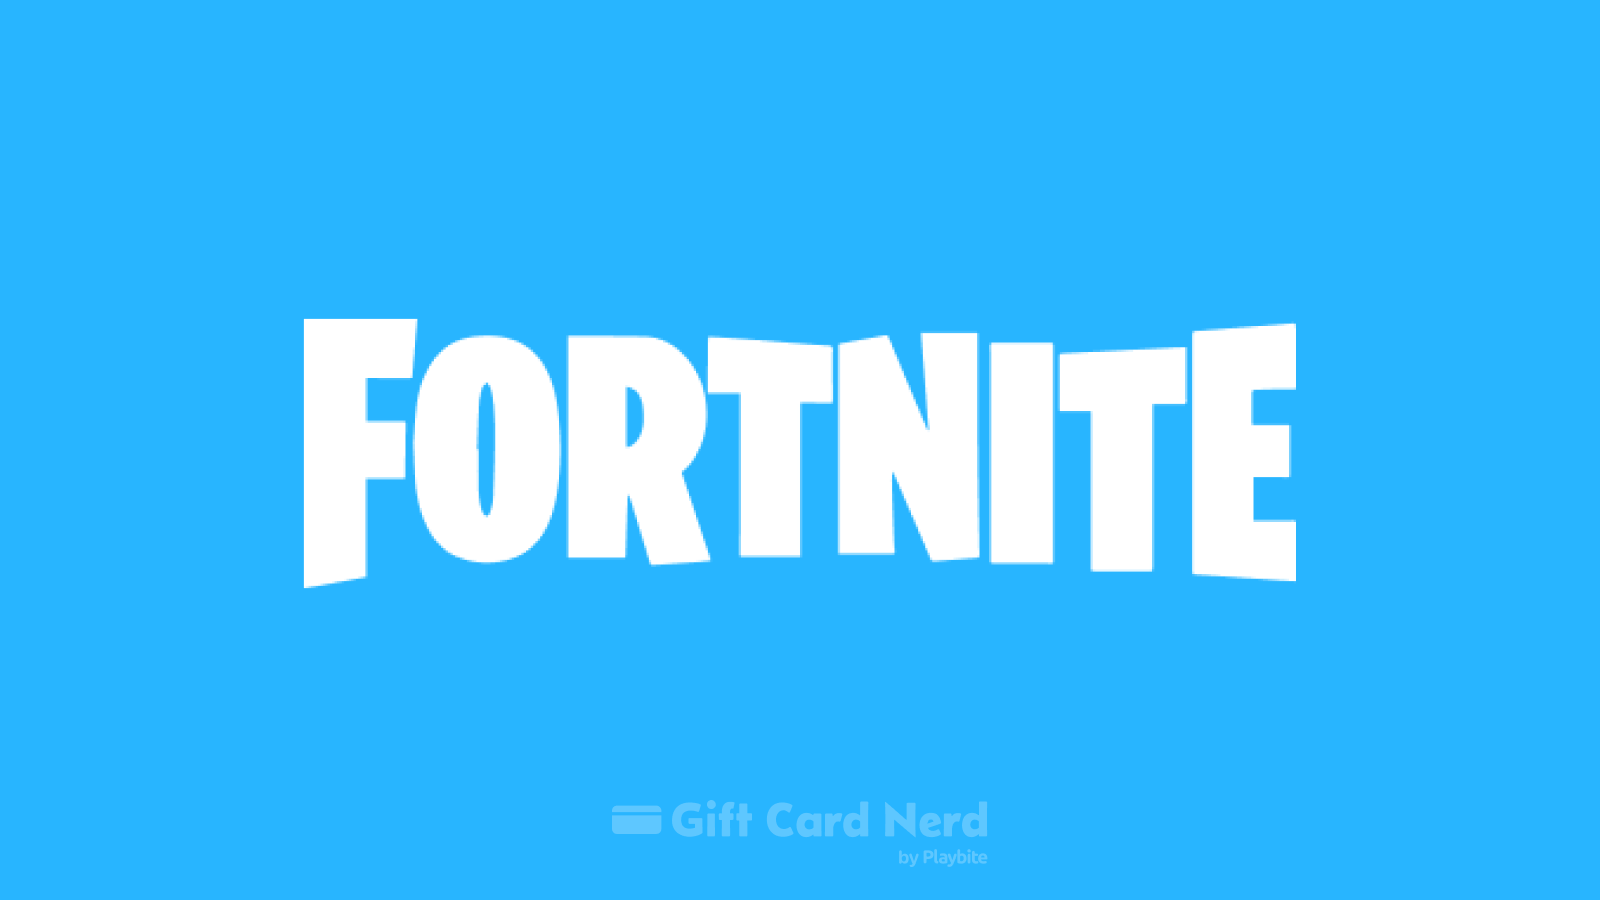 Can I use a Fortnite gift card on Apple Wallet?